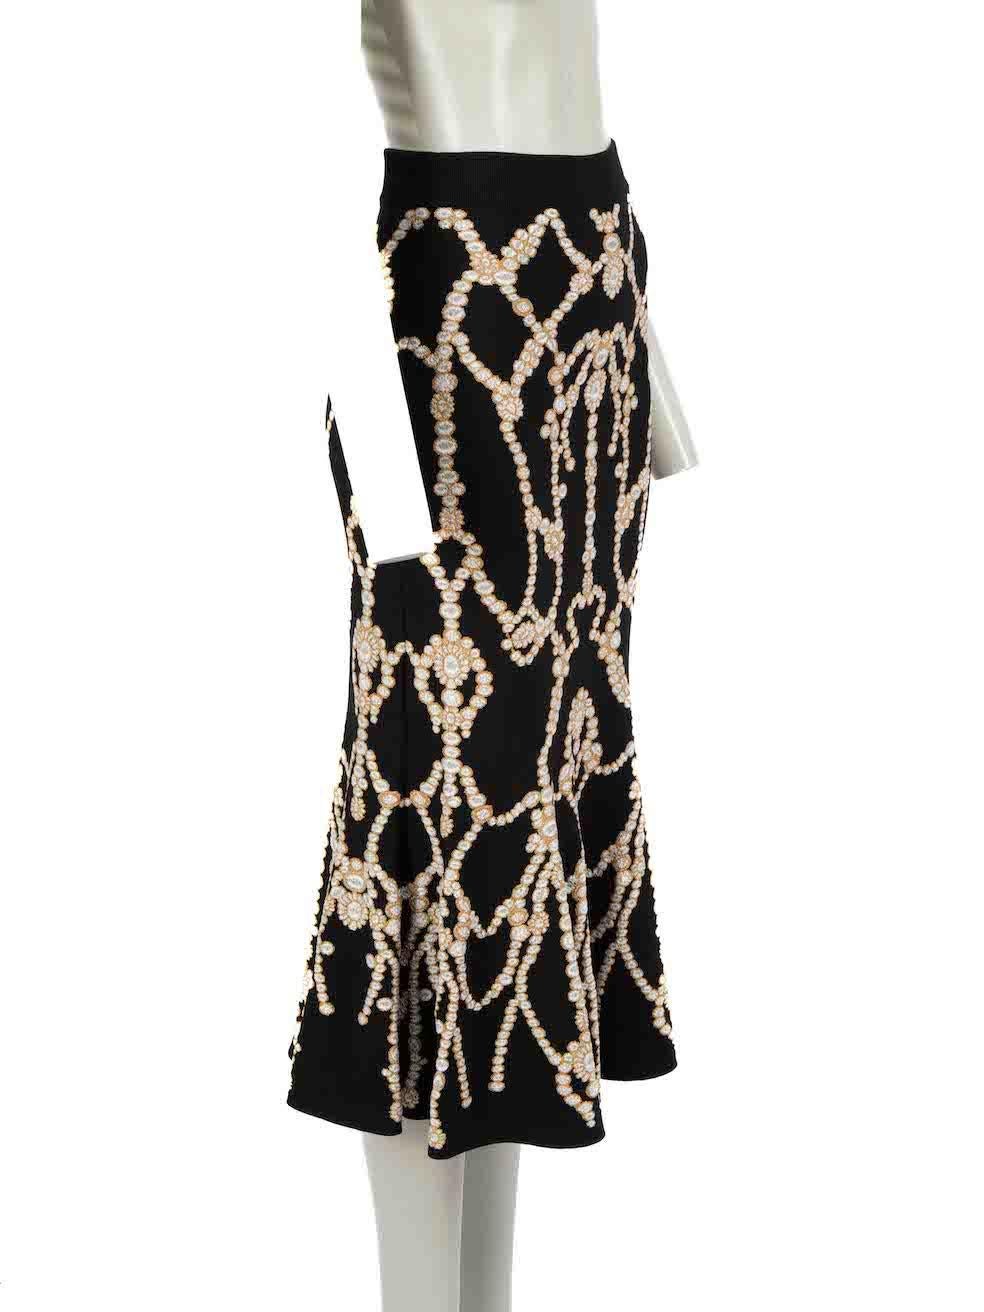 CONDITION is Never worn. No visible wear to skirt is evident on this new Alexander McQueen designer resale item.

Details
Black
Viscose
Flared skirt
Midi length
Knitted and stretchy
Glitter pearl pattern
Side zip closure with hook and eye
 
Made in